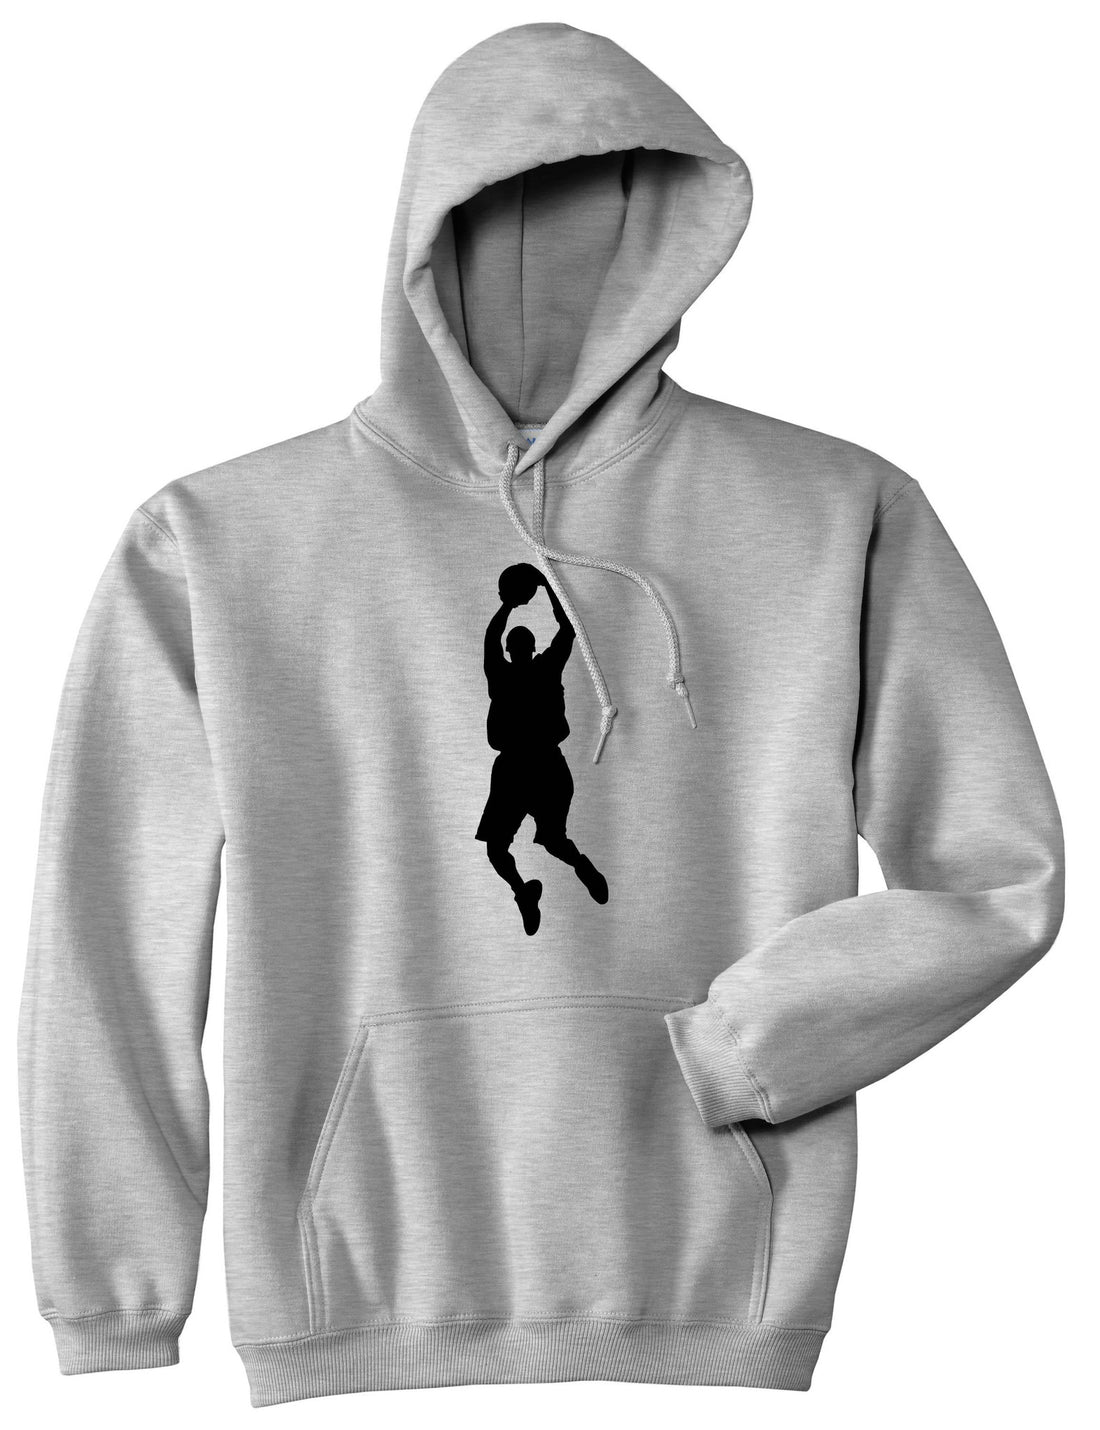 Basketball Shooter Pullover Hoodie Hoody by Kings Of NY